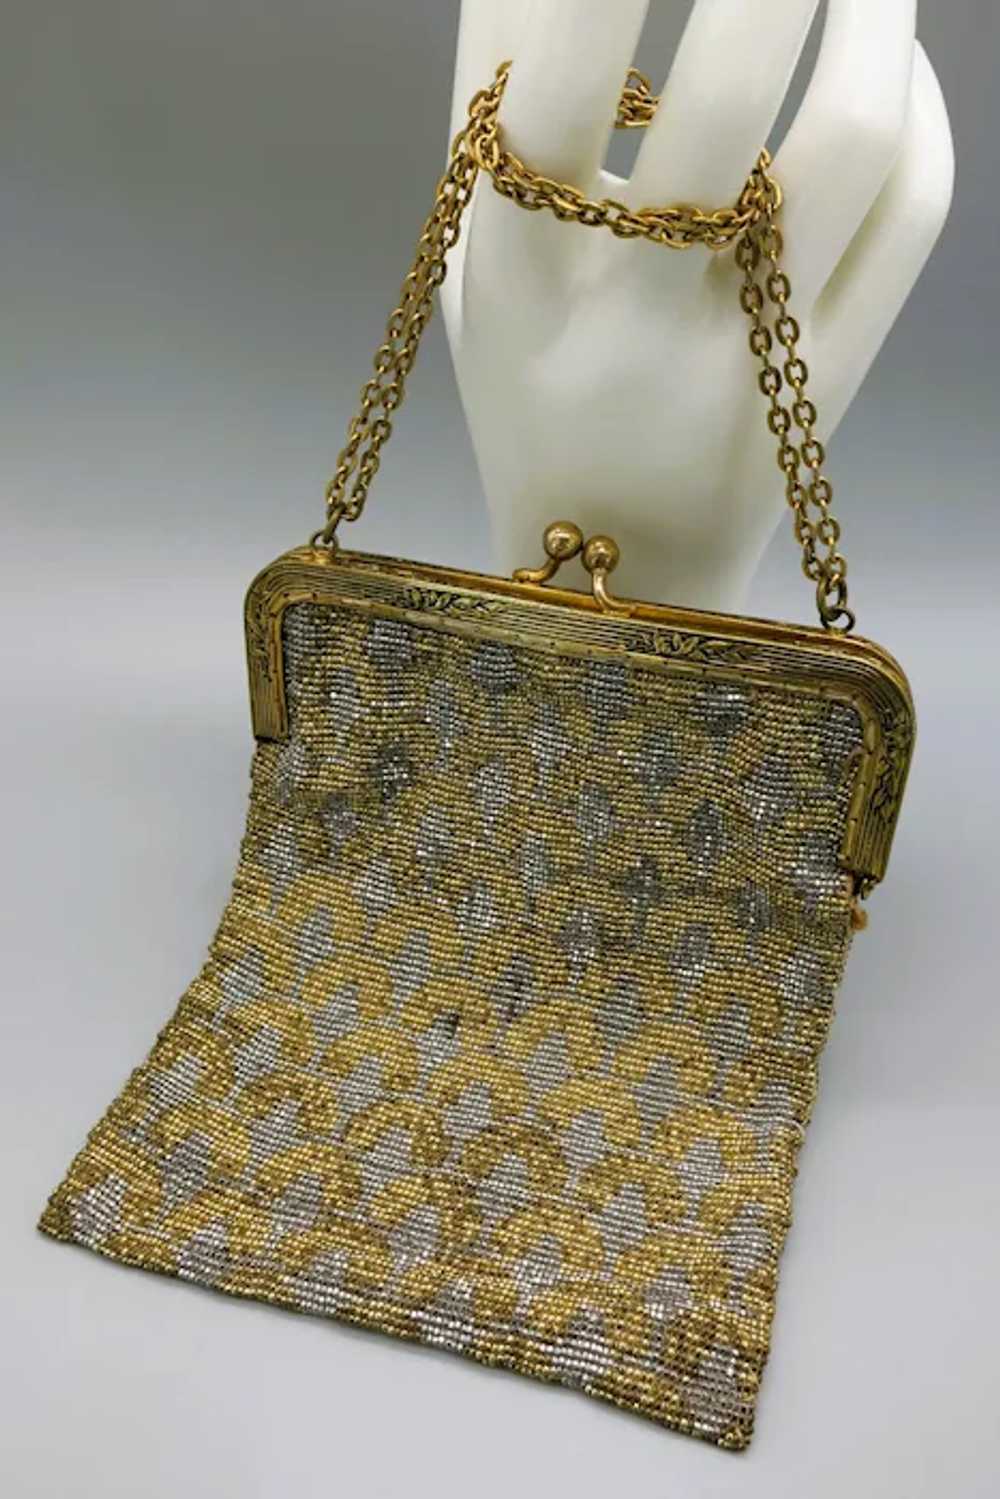 ANTIQUE French Micro Steel Bead Purse - image 9